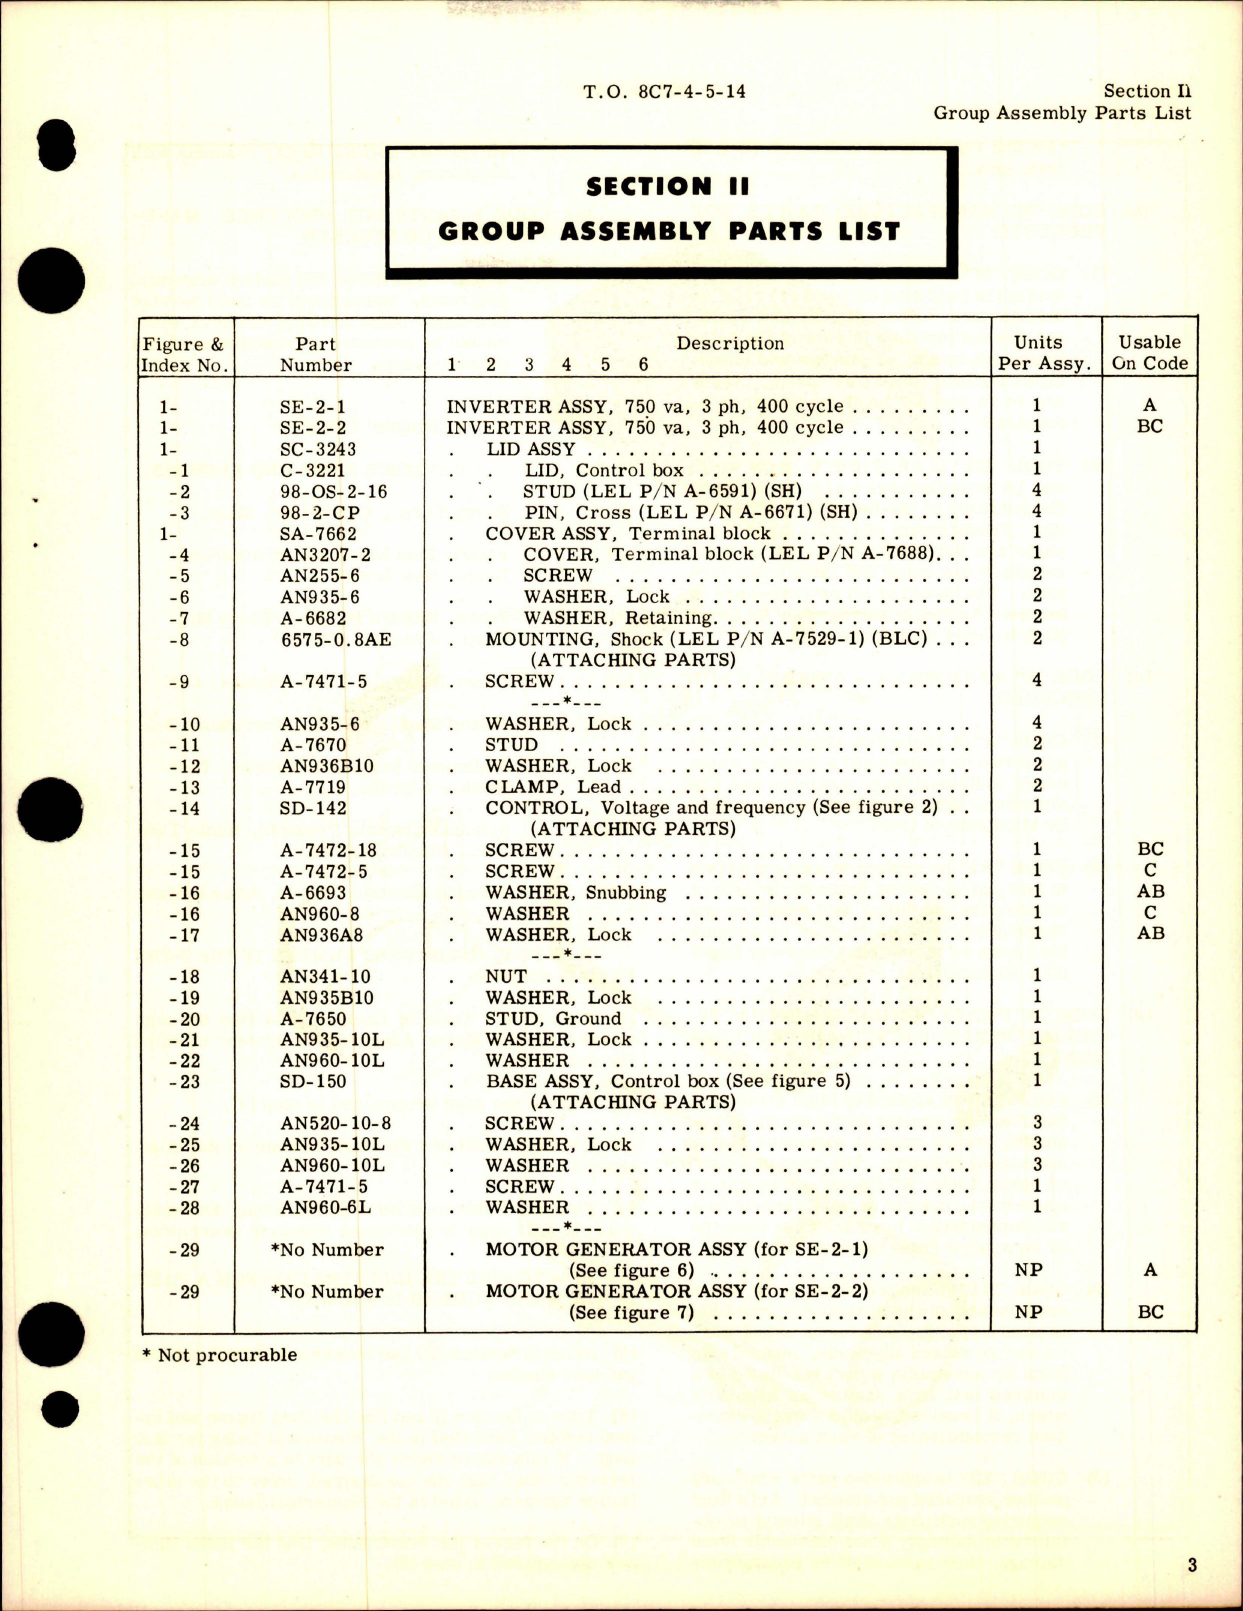 Sample page 7 from AirCorps Library document: Illustrated Parts Breakdown for AN 3534-1 Inverter - Part SE-2-1 and SE-2-2 